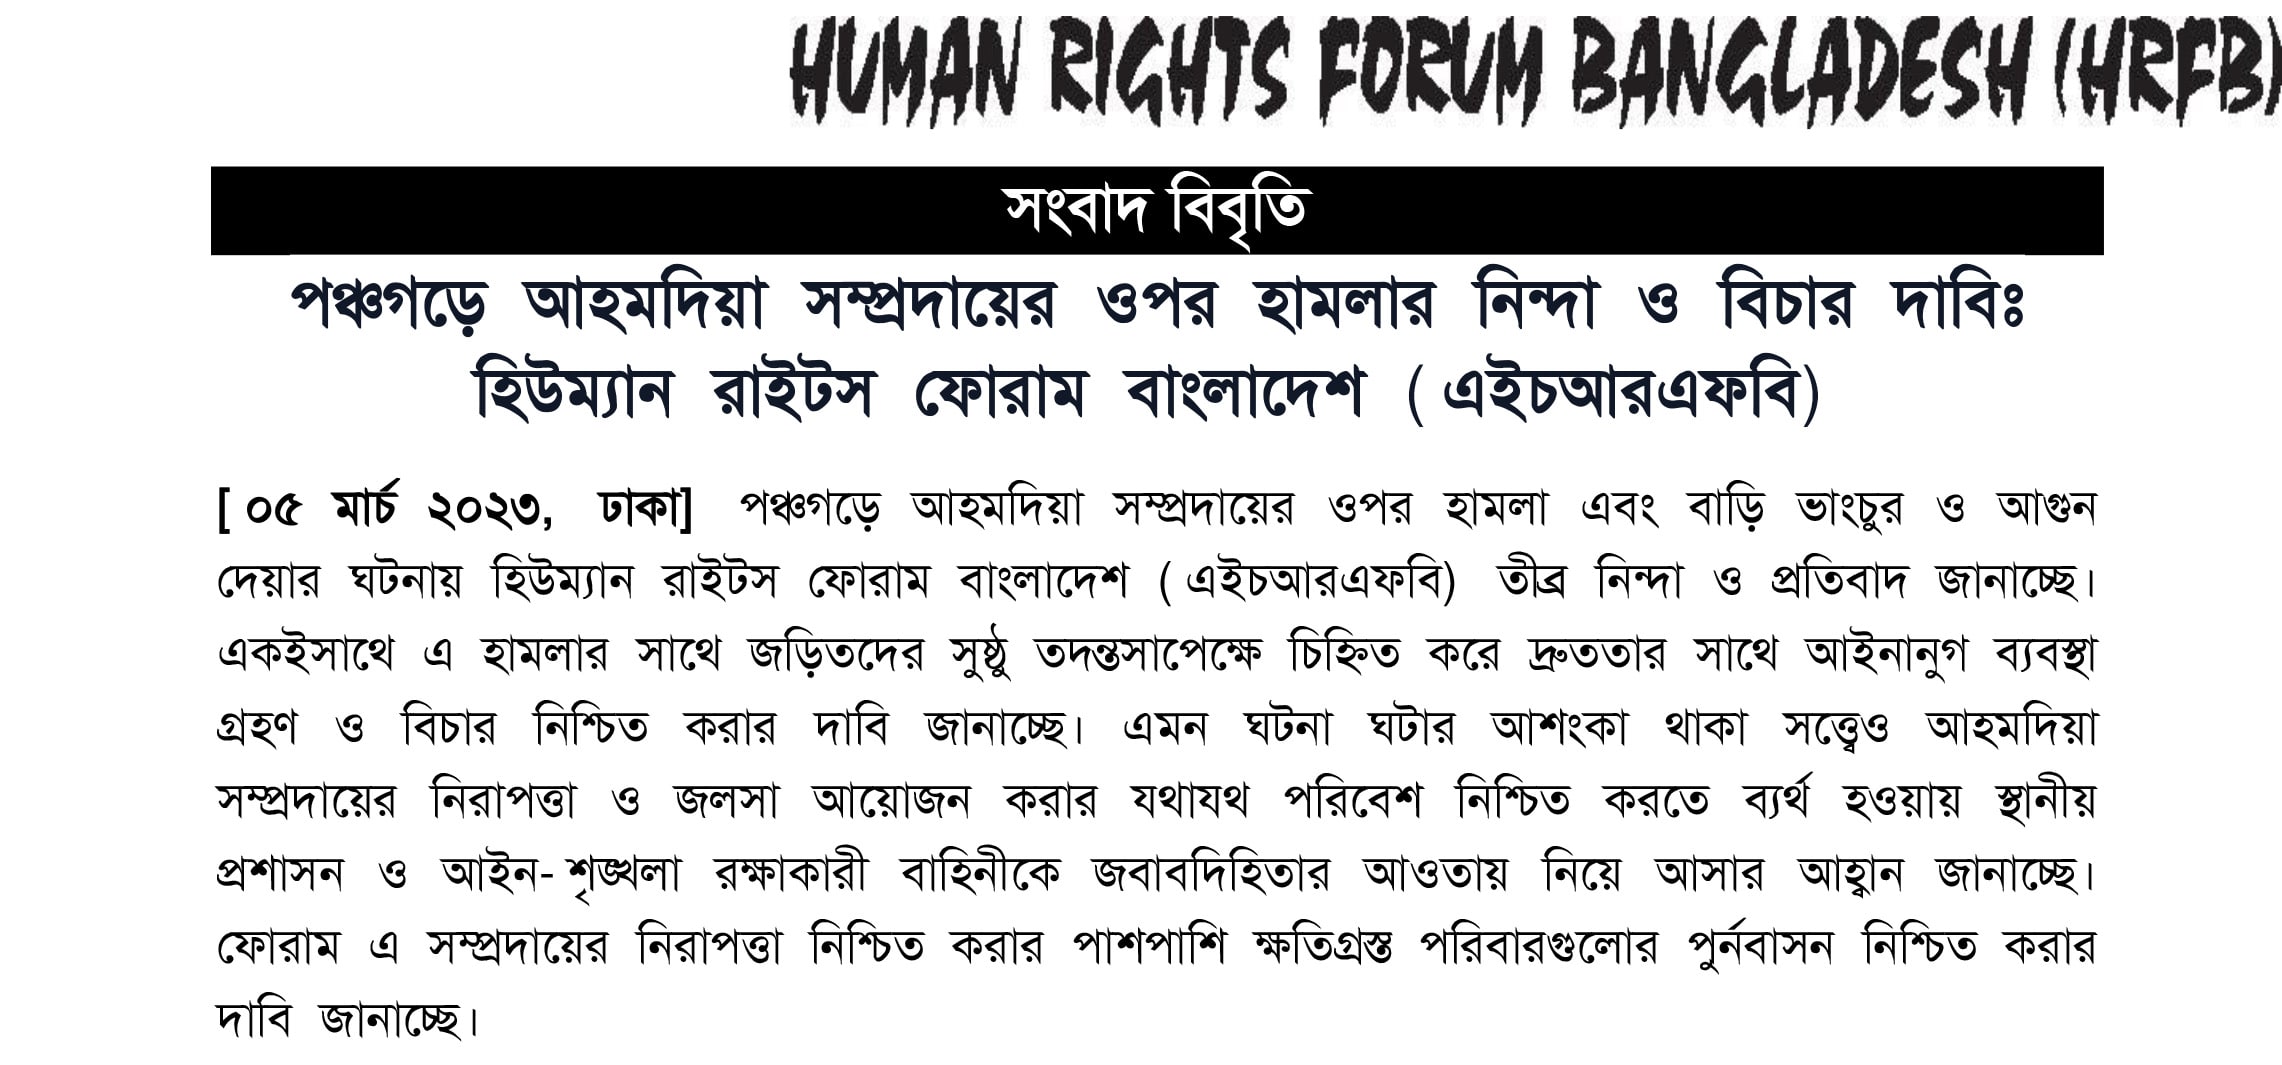 Read more about the article Attack on the Ahmadiyya Community in Panchagarh: HRFB’s Deep Condemnation and Demands for Justice